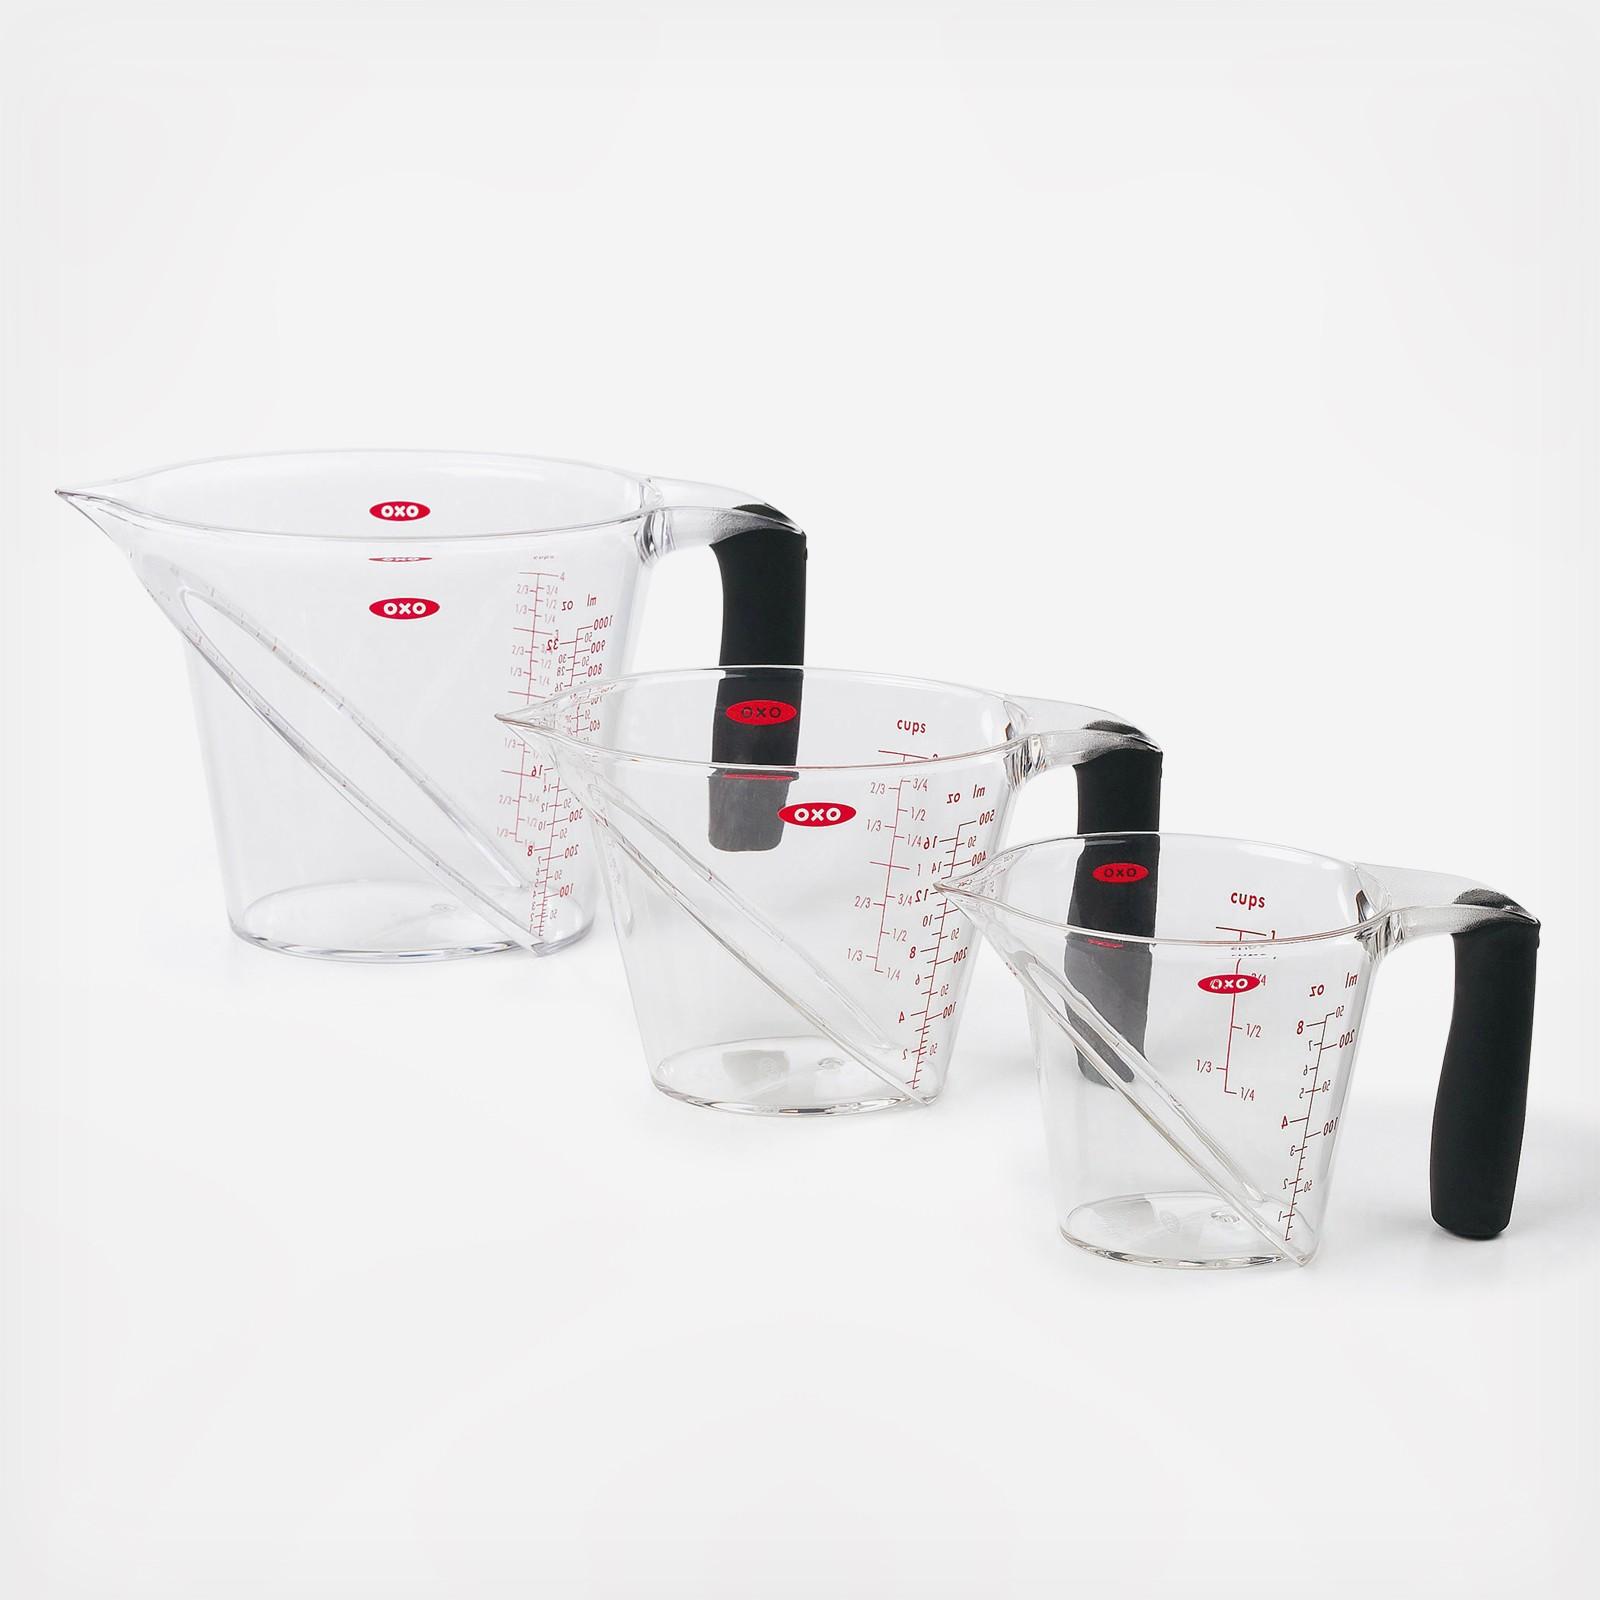 2 cup OXO Good Grips Adjustable Measuring Cup capacity- See Details  Pictures